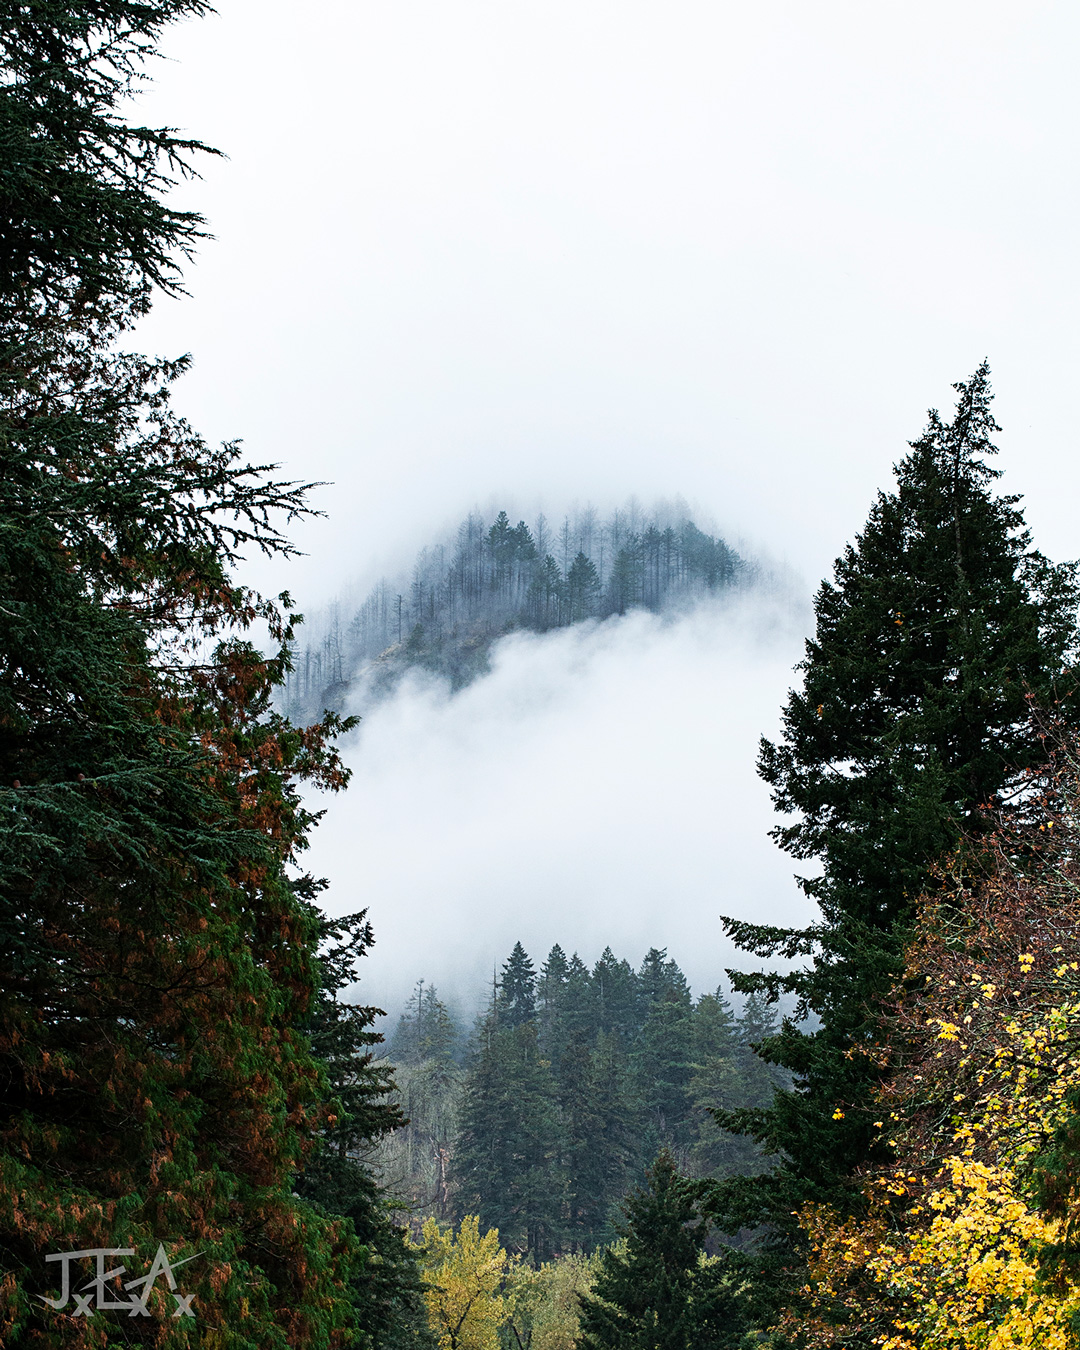 A picture showing layers of trees and fog on a fall day in the Columbia River gorge.